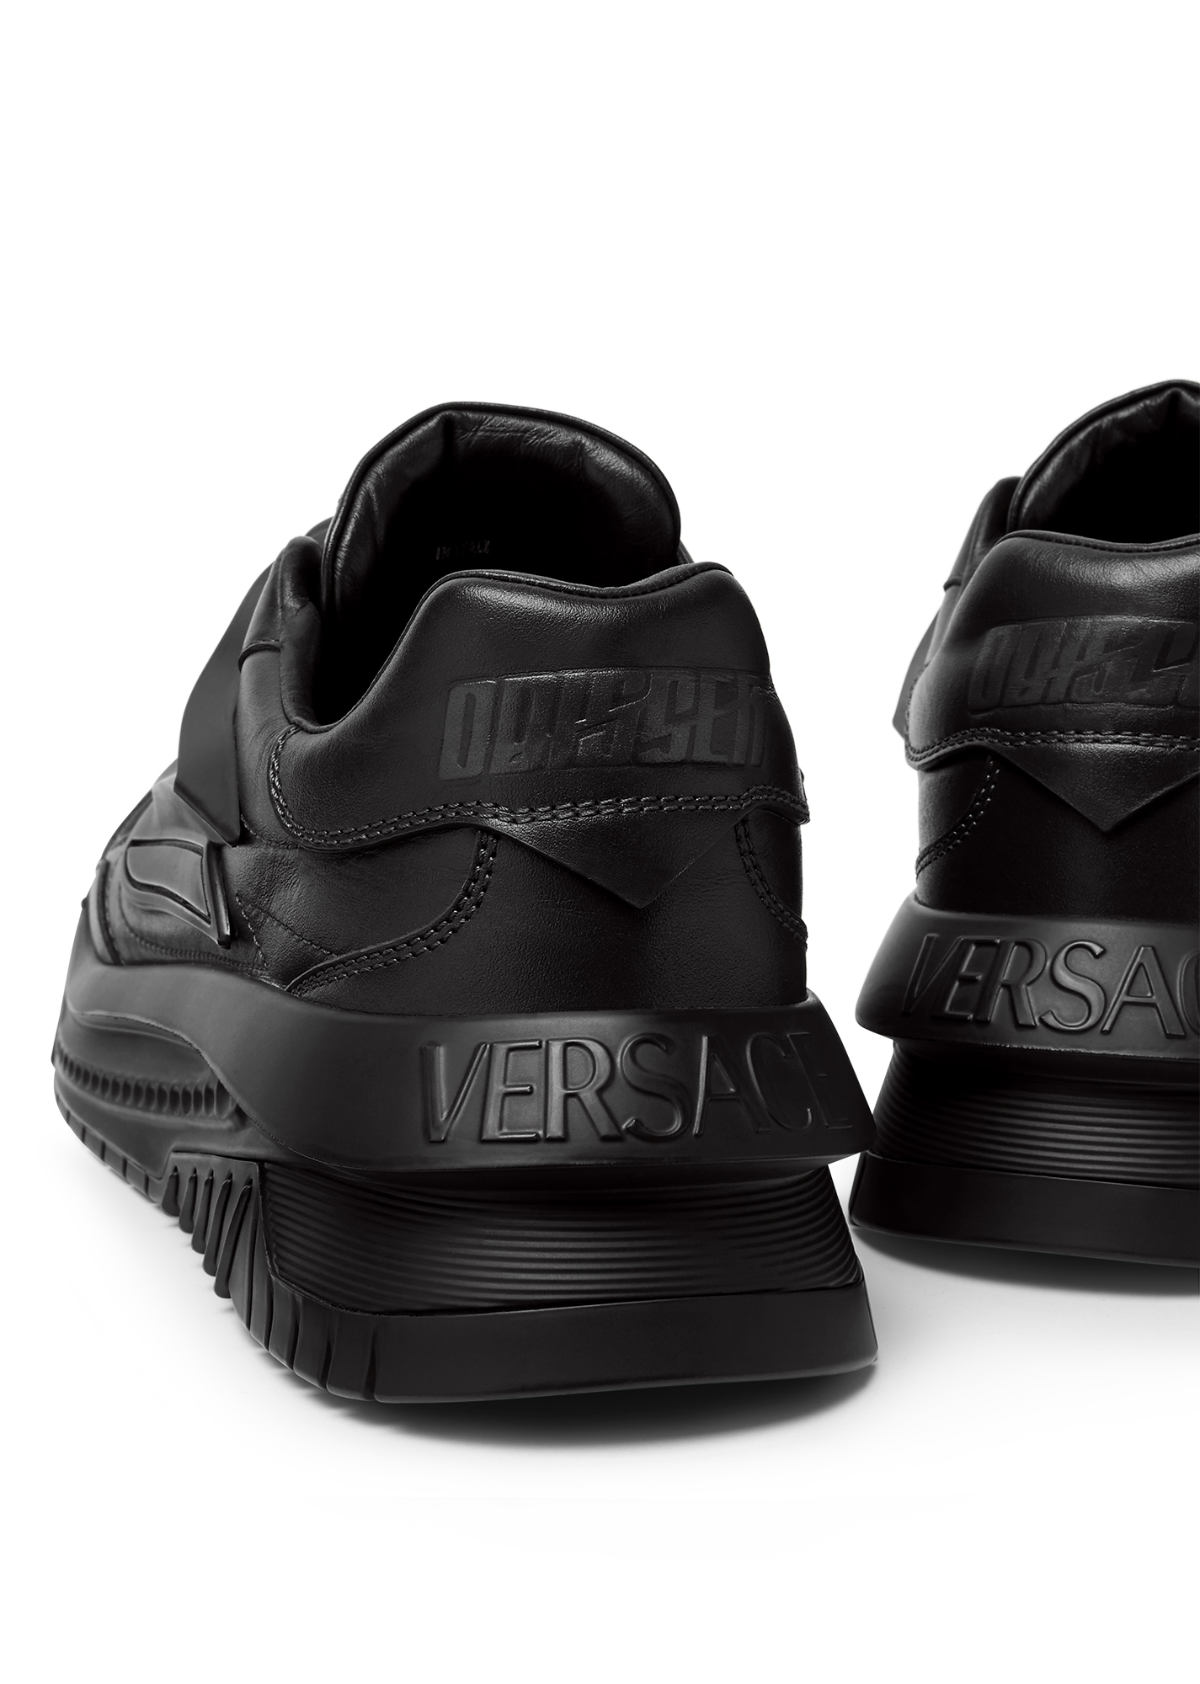 Versace Introduces Its New Odissea Sneaker